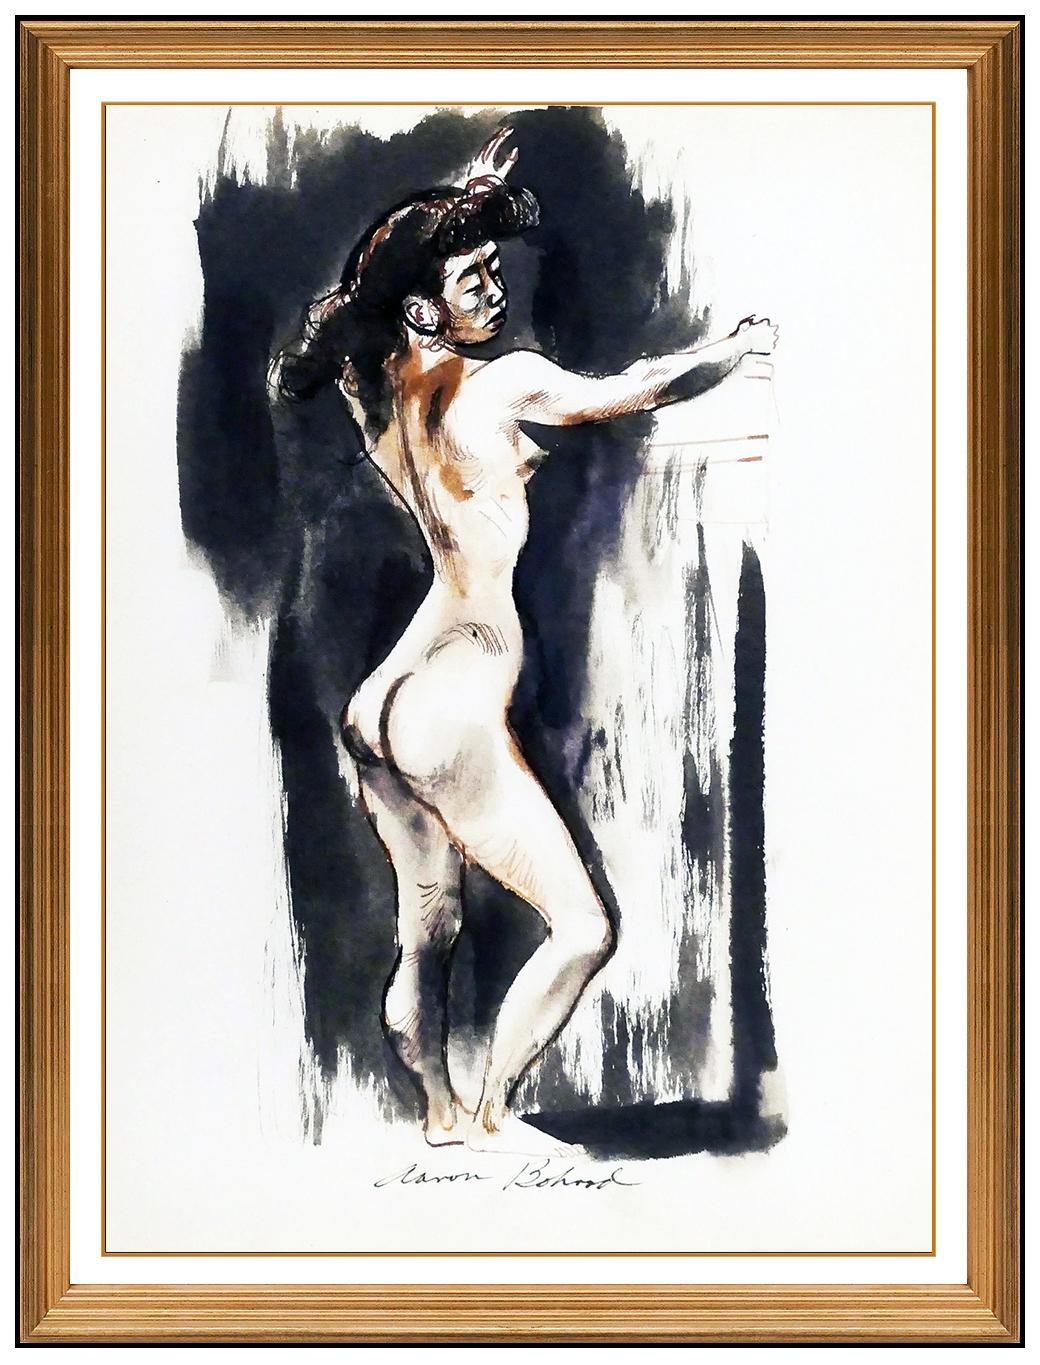 Artist: Aaron Bohrod
Title: Glamorous Original
Medium: Original Ink and Watercolor Painting
Size: 11 x 8.5"
Frame: 18 x 15.5"
Published on page 201 of "Aaron Bohrod: Figure Sketches"